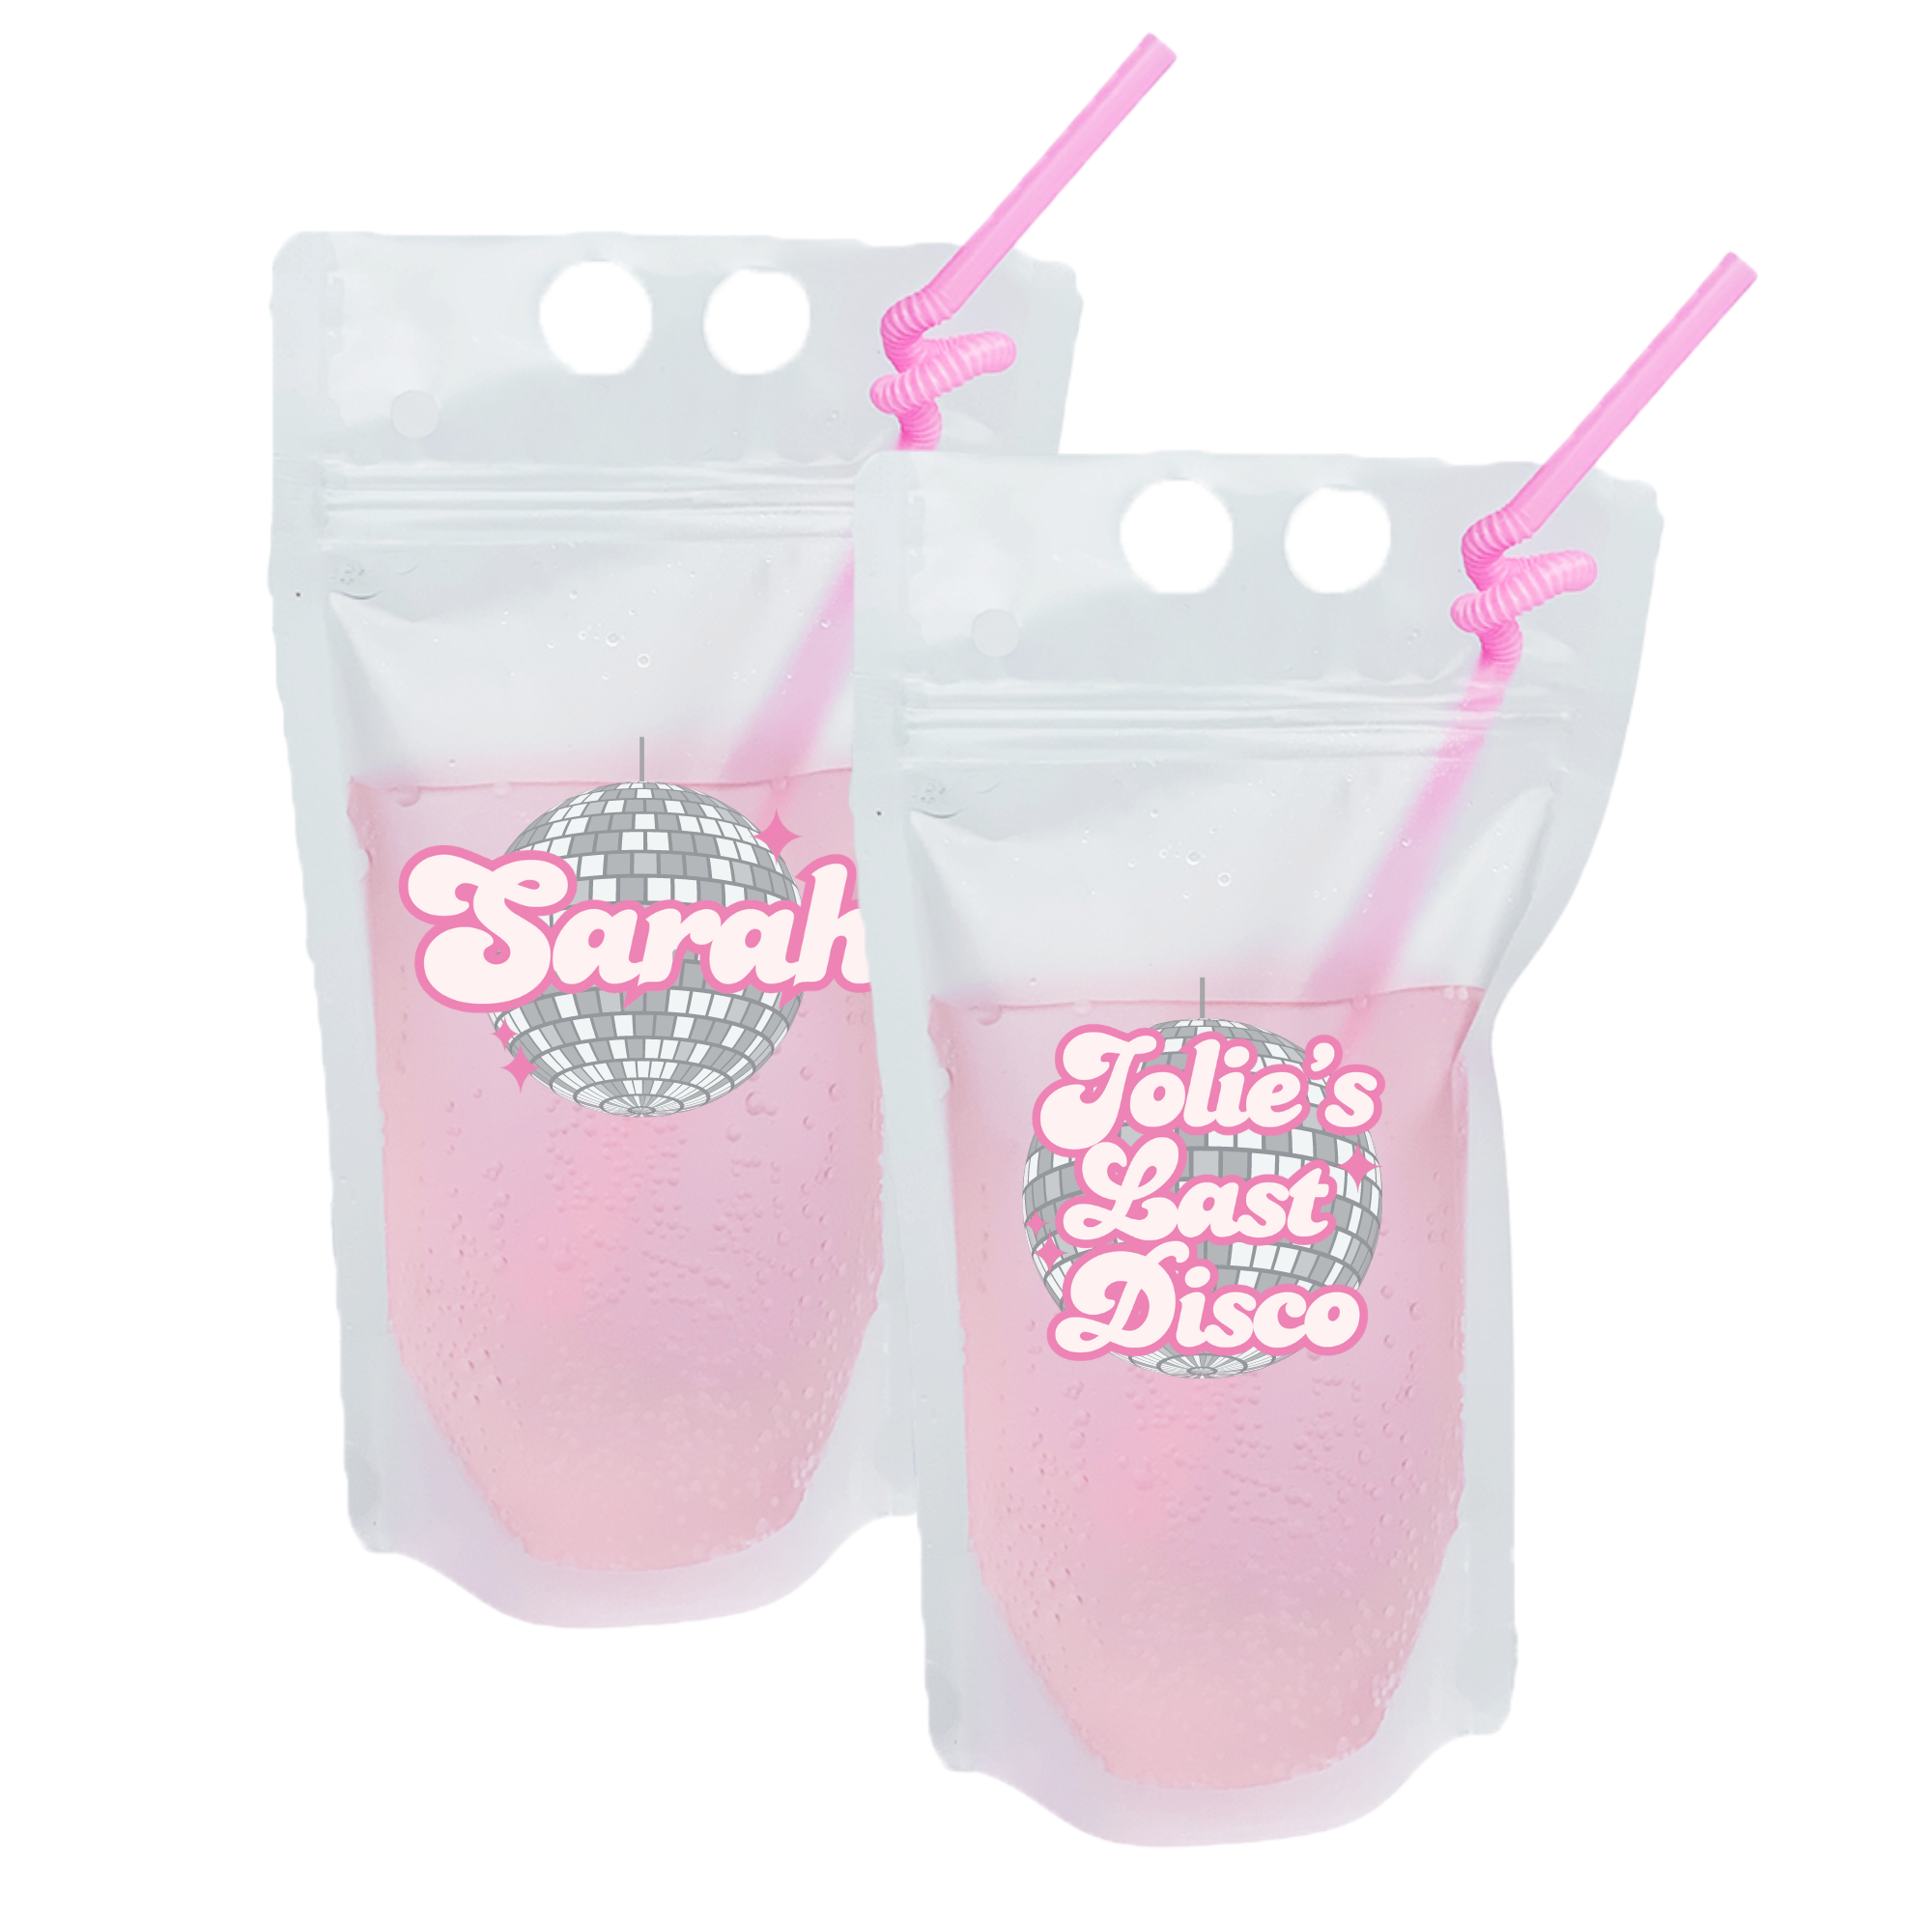 Drink Pouches, Juice Pouches, Alcohol Drink Pouches, Reusable Drink Pouch, Pool Party Cup, Adult Juice Pouch, Party Cups